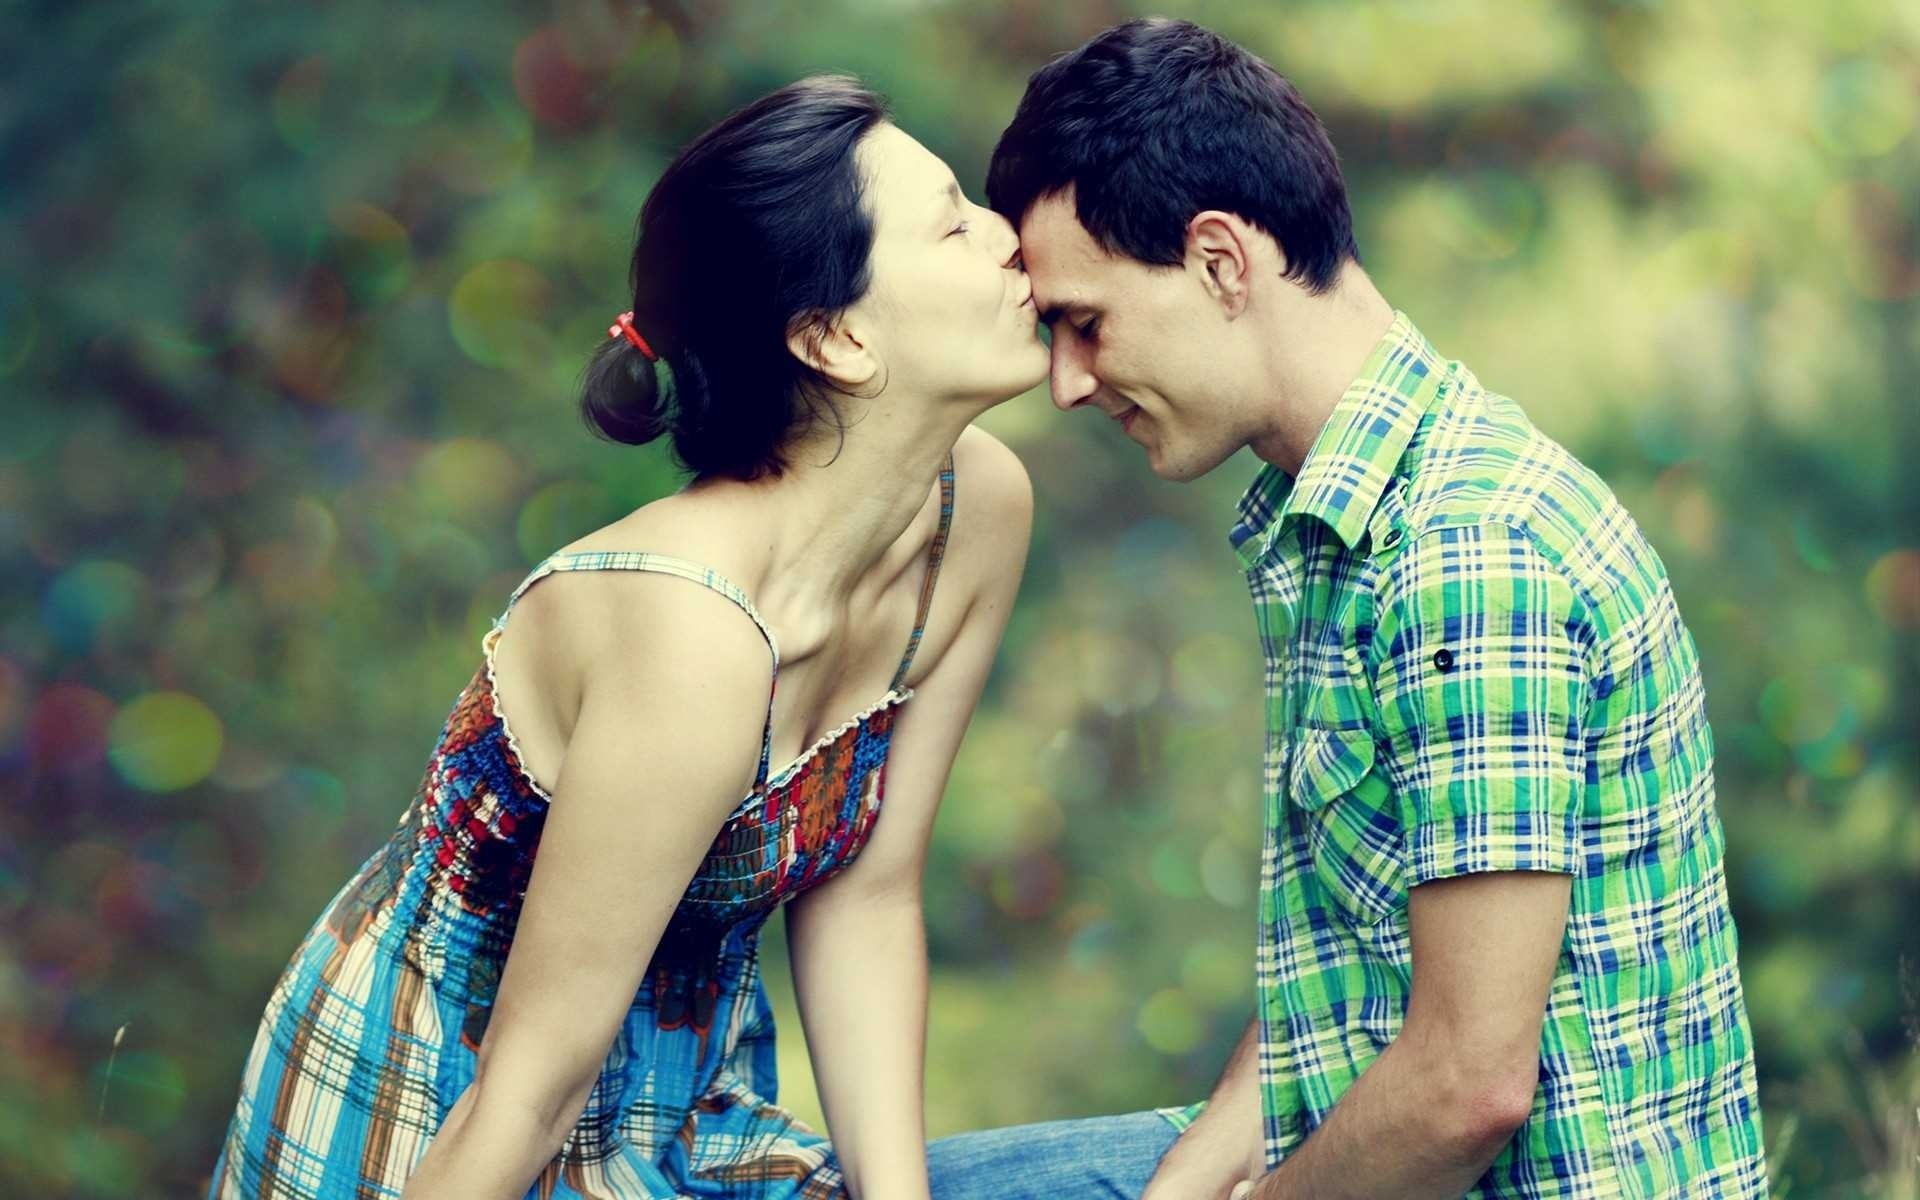 1920x1200 Romantic Cute Love Hd Pic Hd Love Couples Wallpapers Group (83+) ...